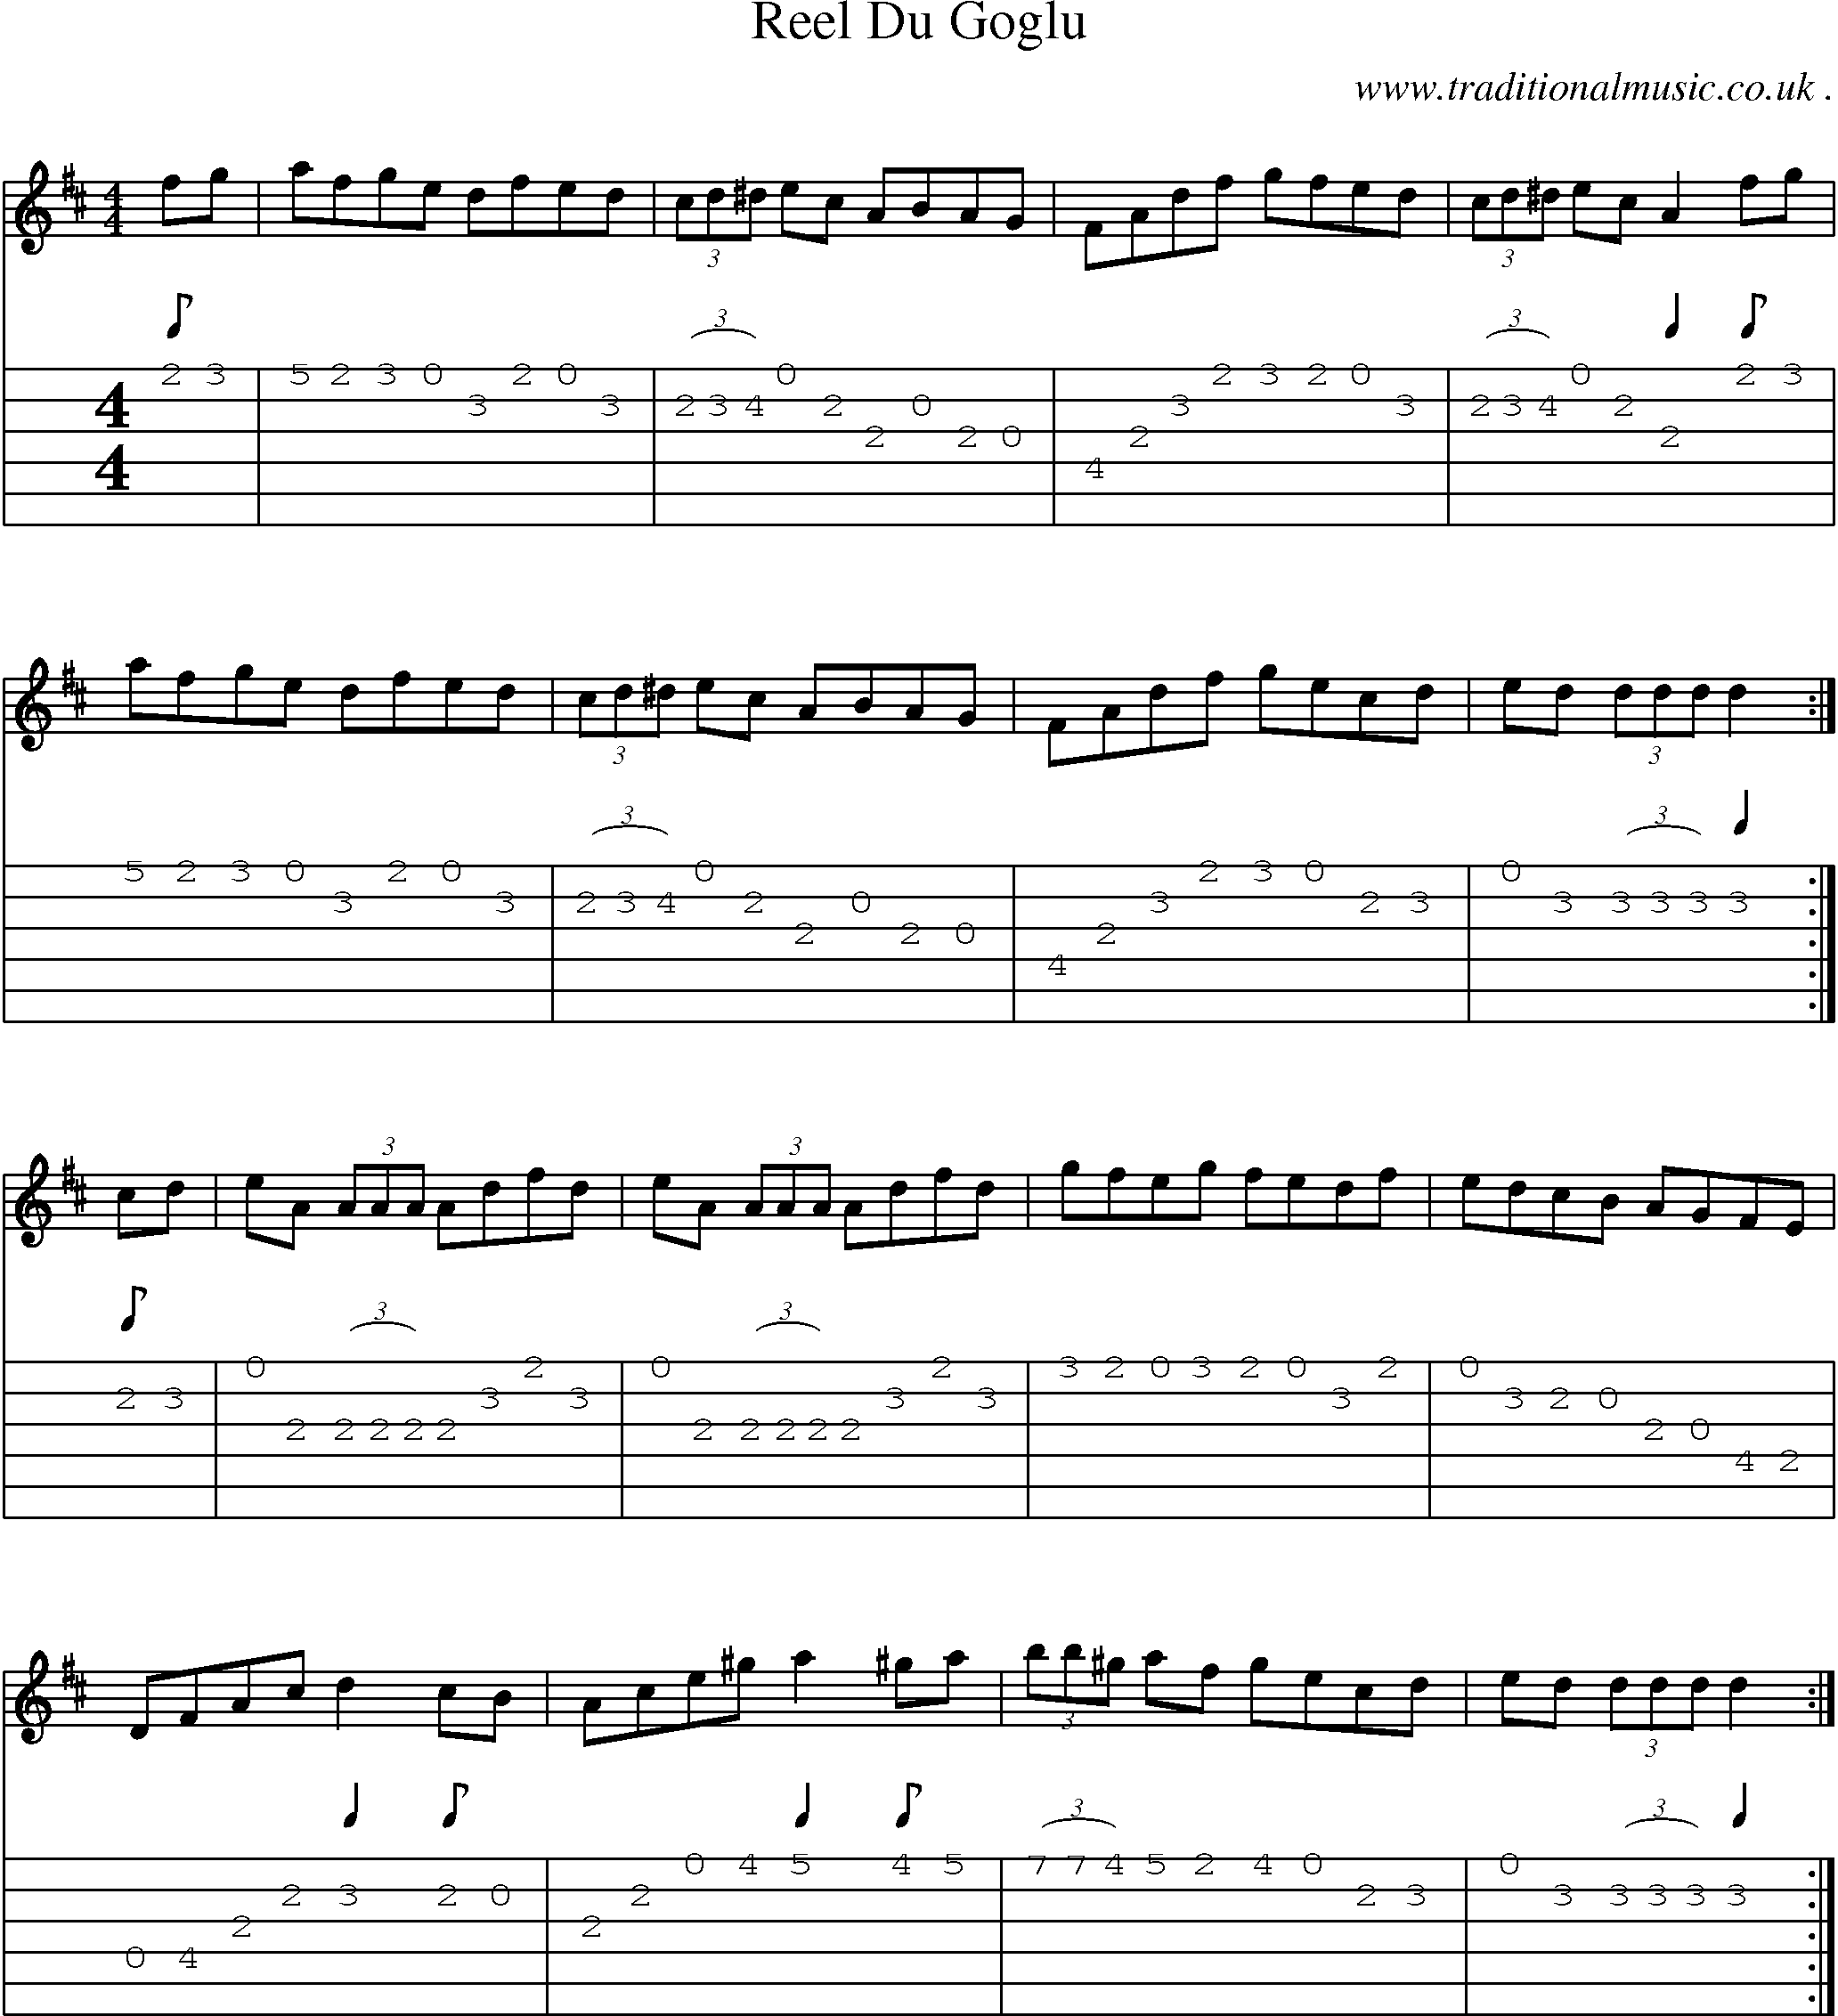 Music Score and Guitar Tabs for Reel Du Goglu